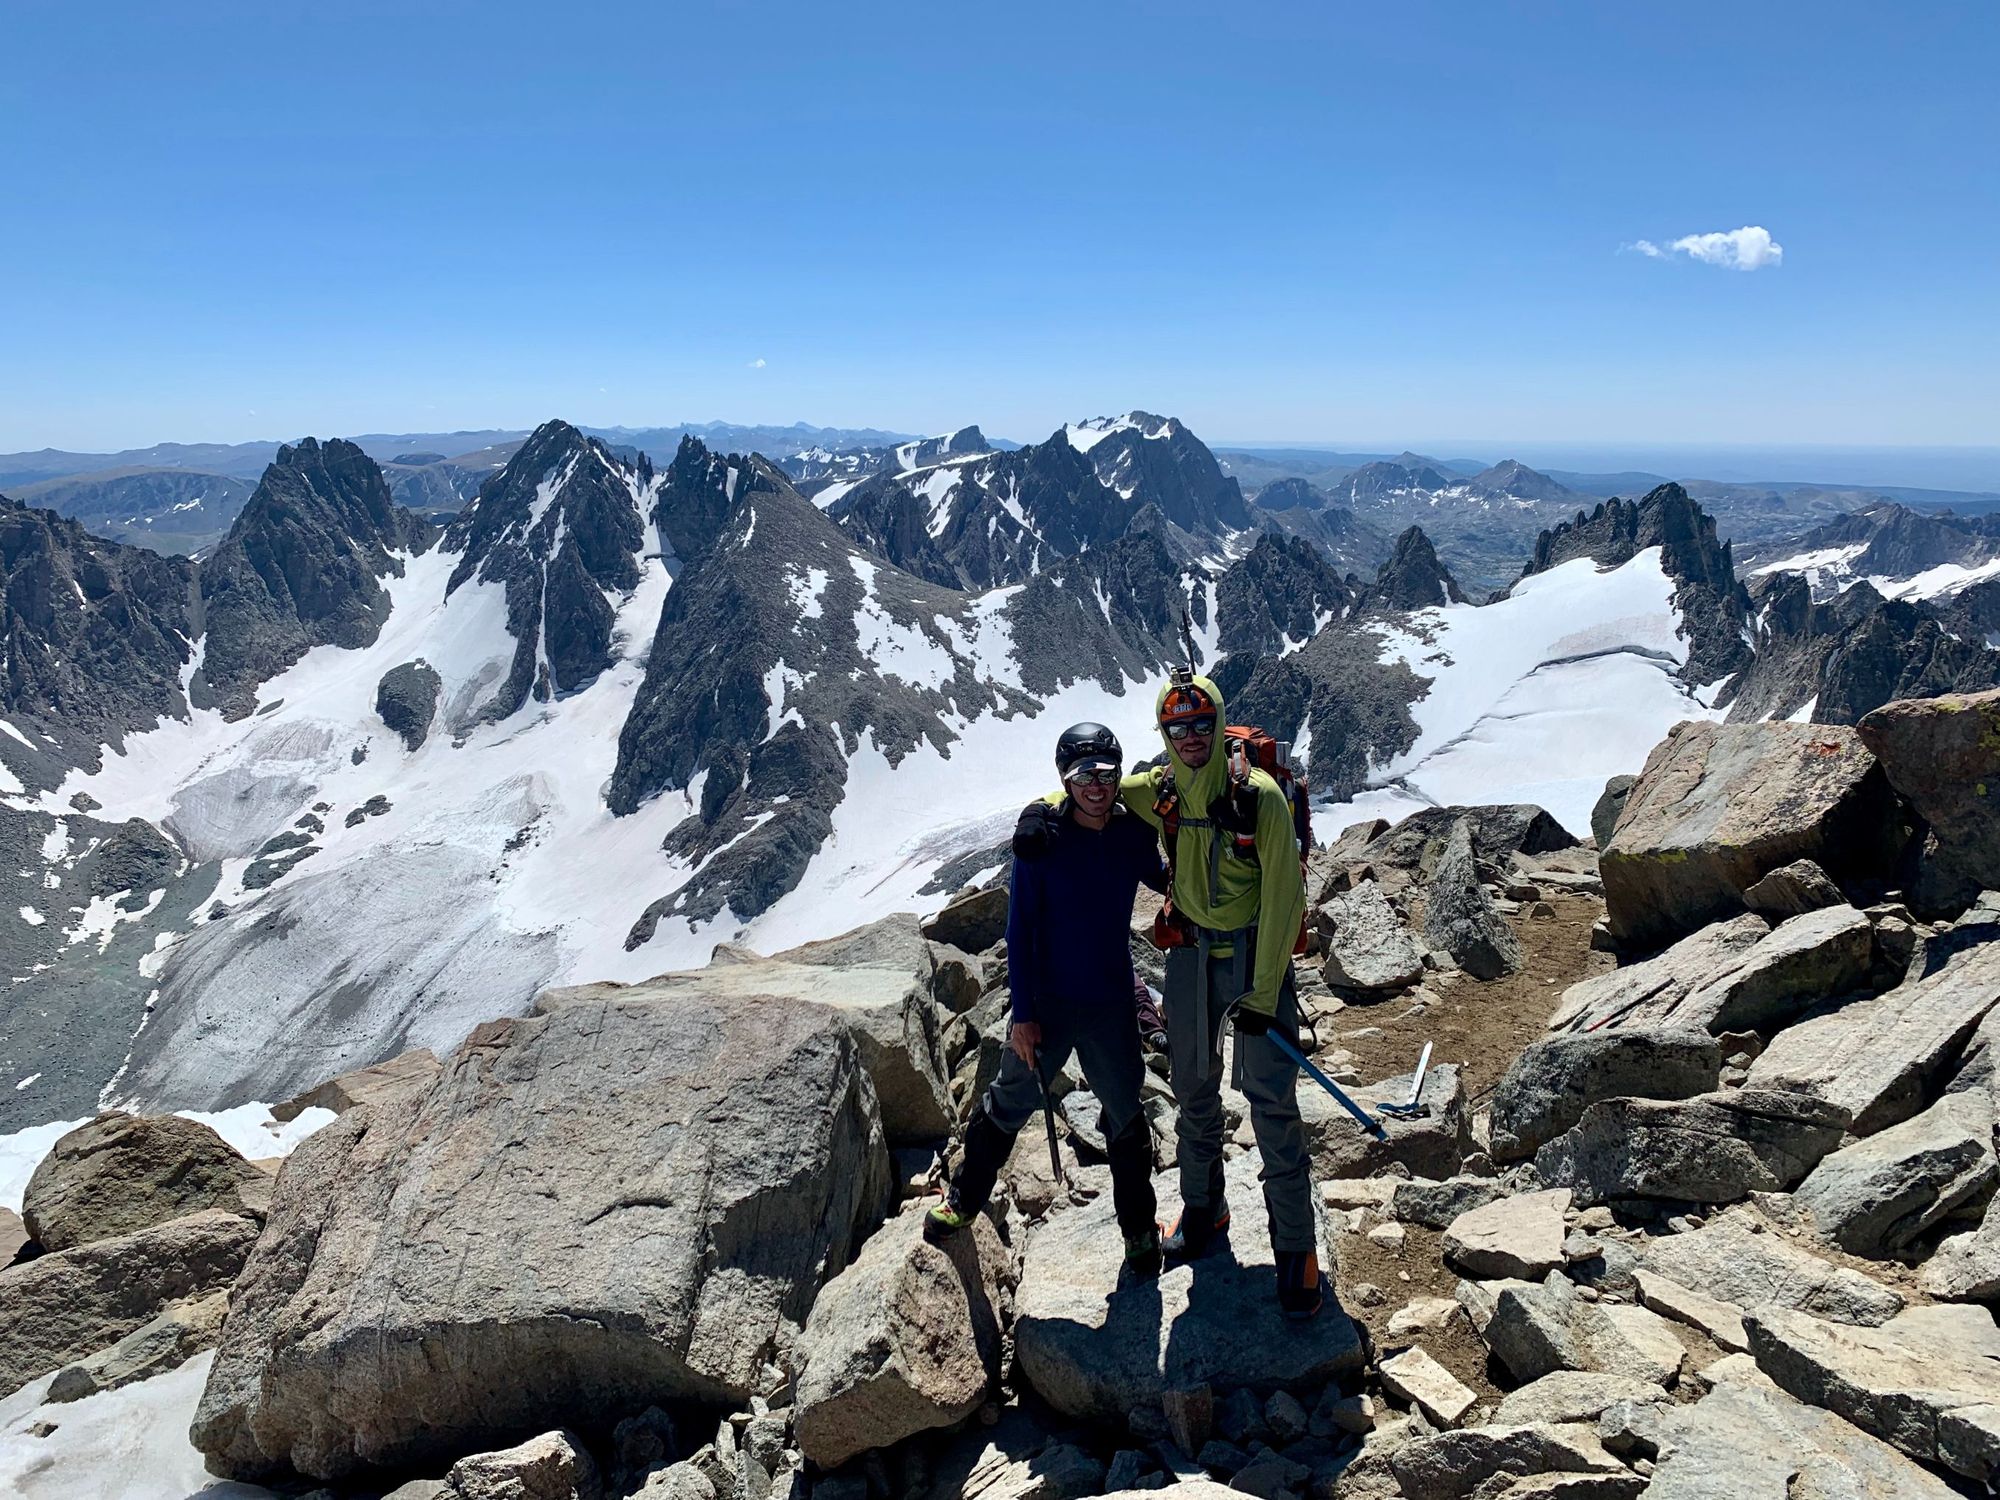 Michael and Patrick at the top of Gannett Peak (4,209m) in Wyoming. Photo: Project 50 in 50